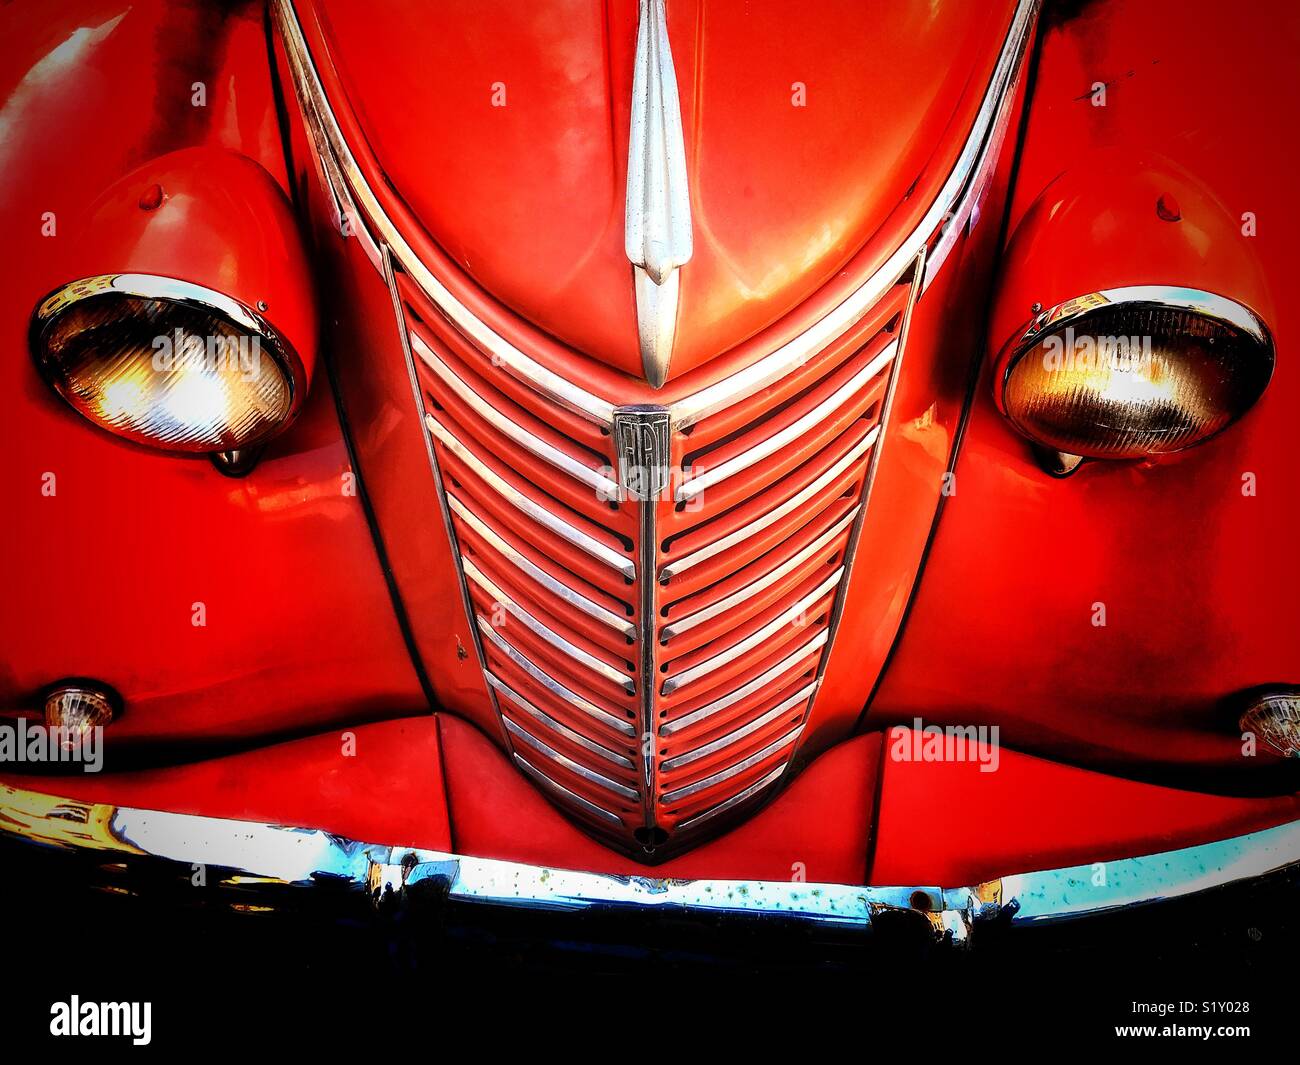 Vintage red Fiat van, viewed from above, showing front radiator grill in  chrome, headlamps mounted on wheel arches , chrome bumper and side lights  Stock Photo - Alamy